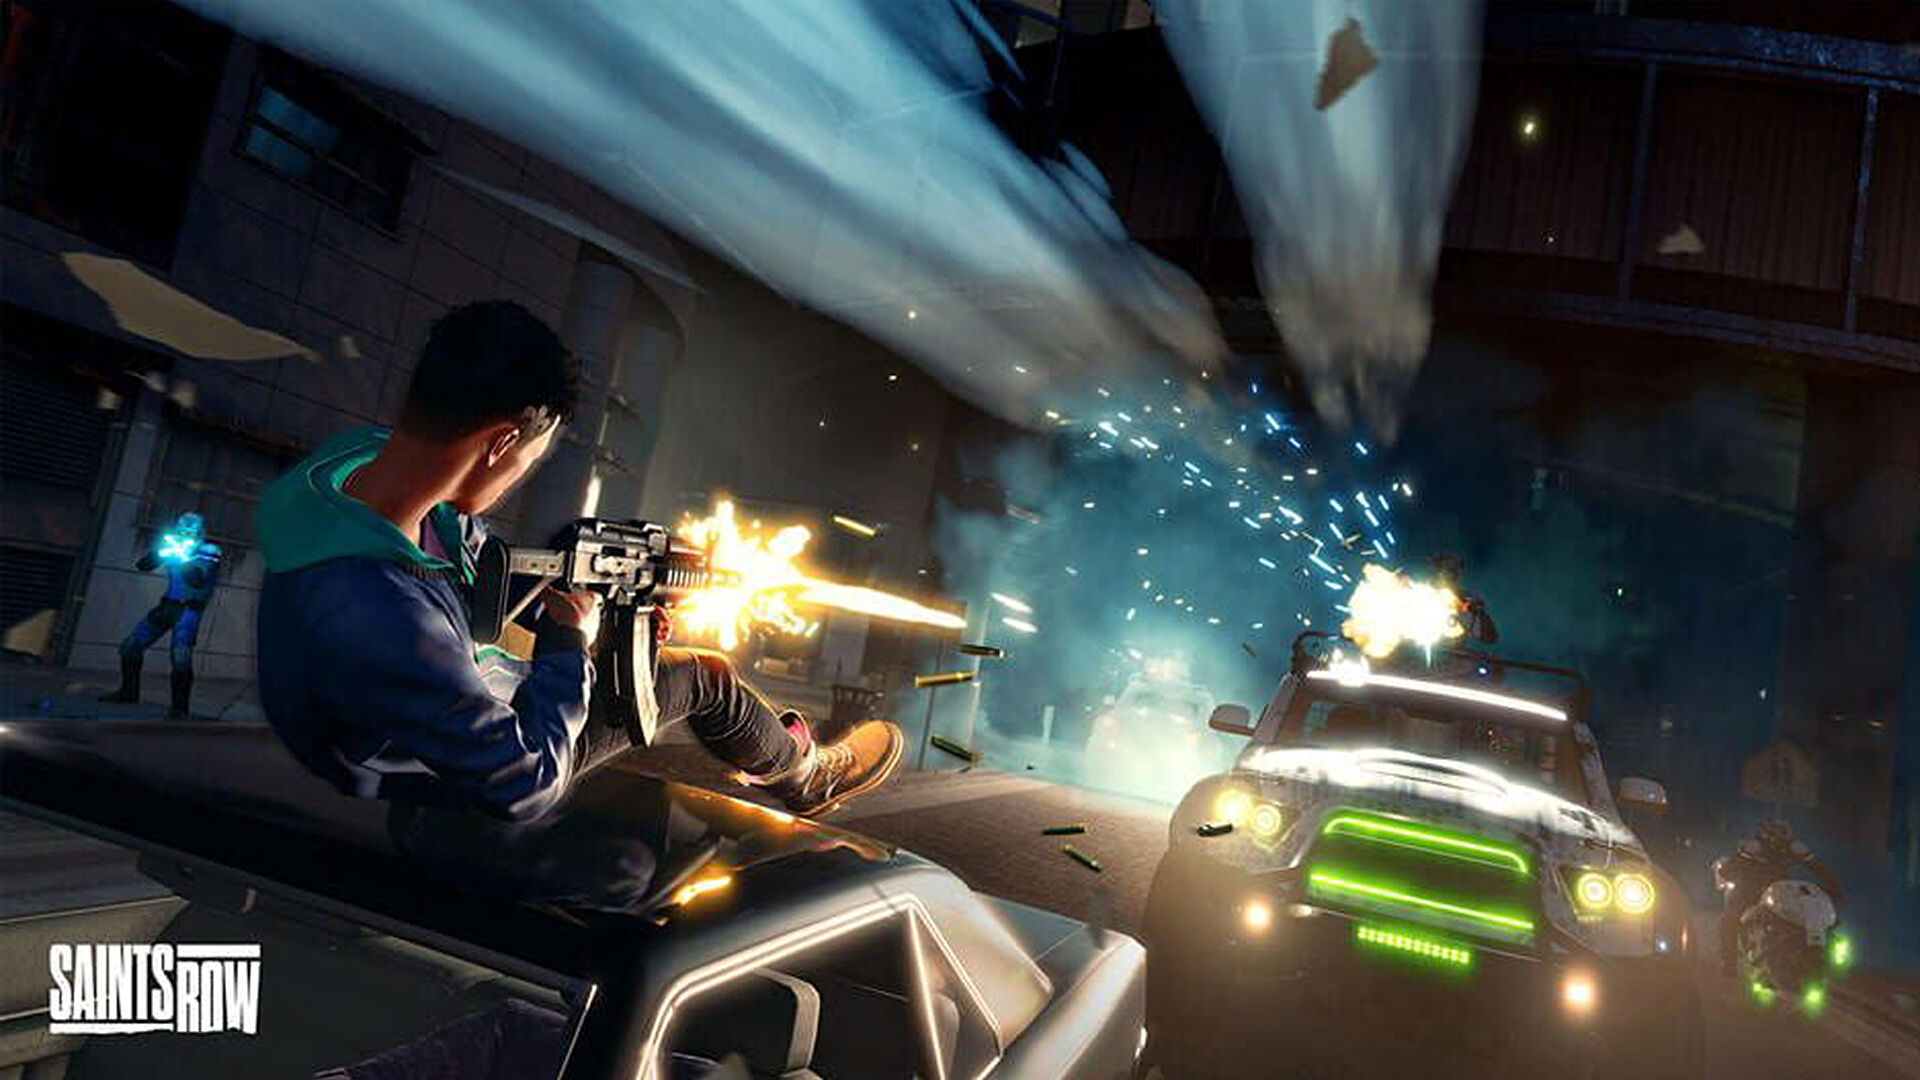 Saints Row gameplay overview shows off all the factions out to get you